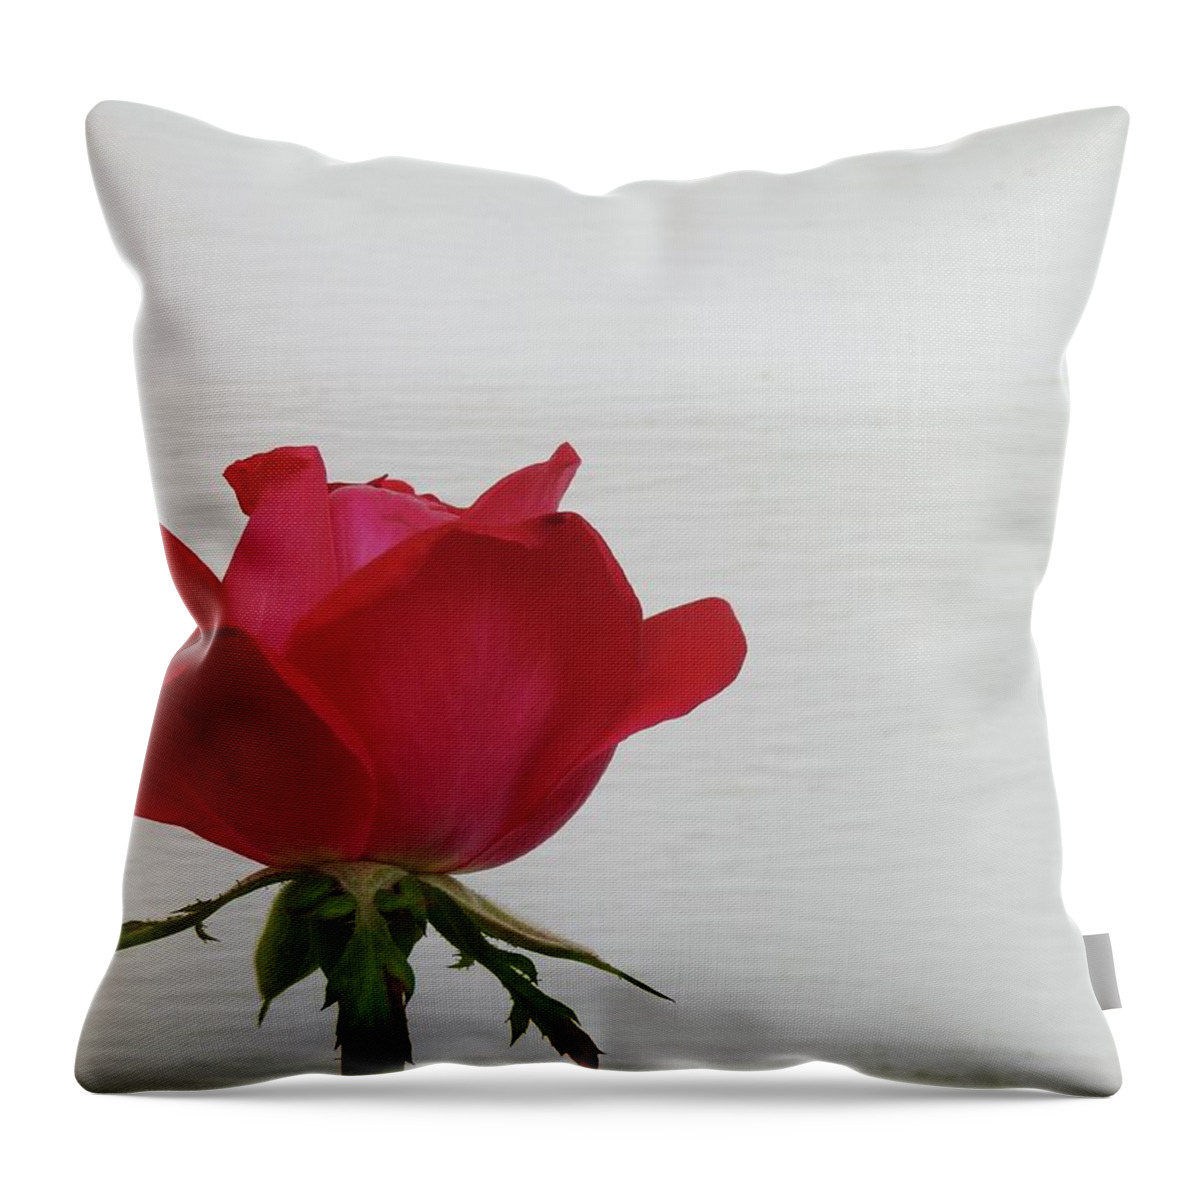 Rose Throw Pillow featuring the photograph Rose Haven by Kathy Ozzard Chism